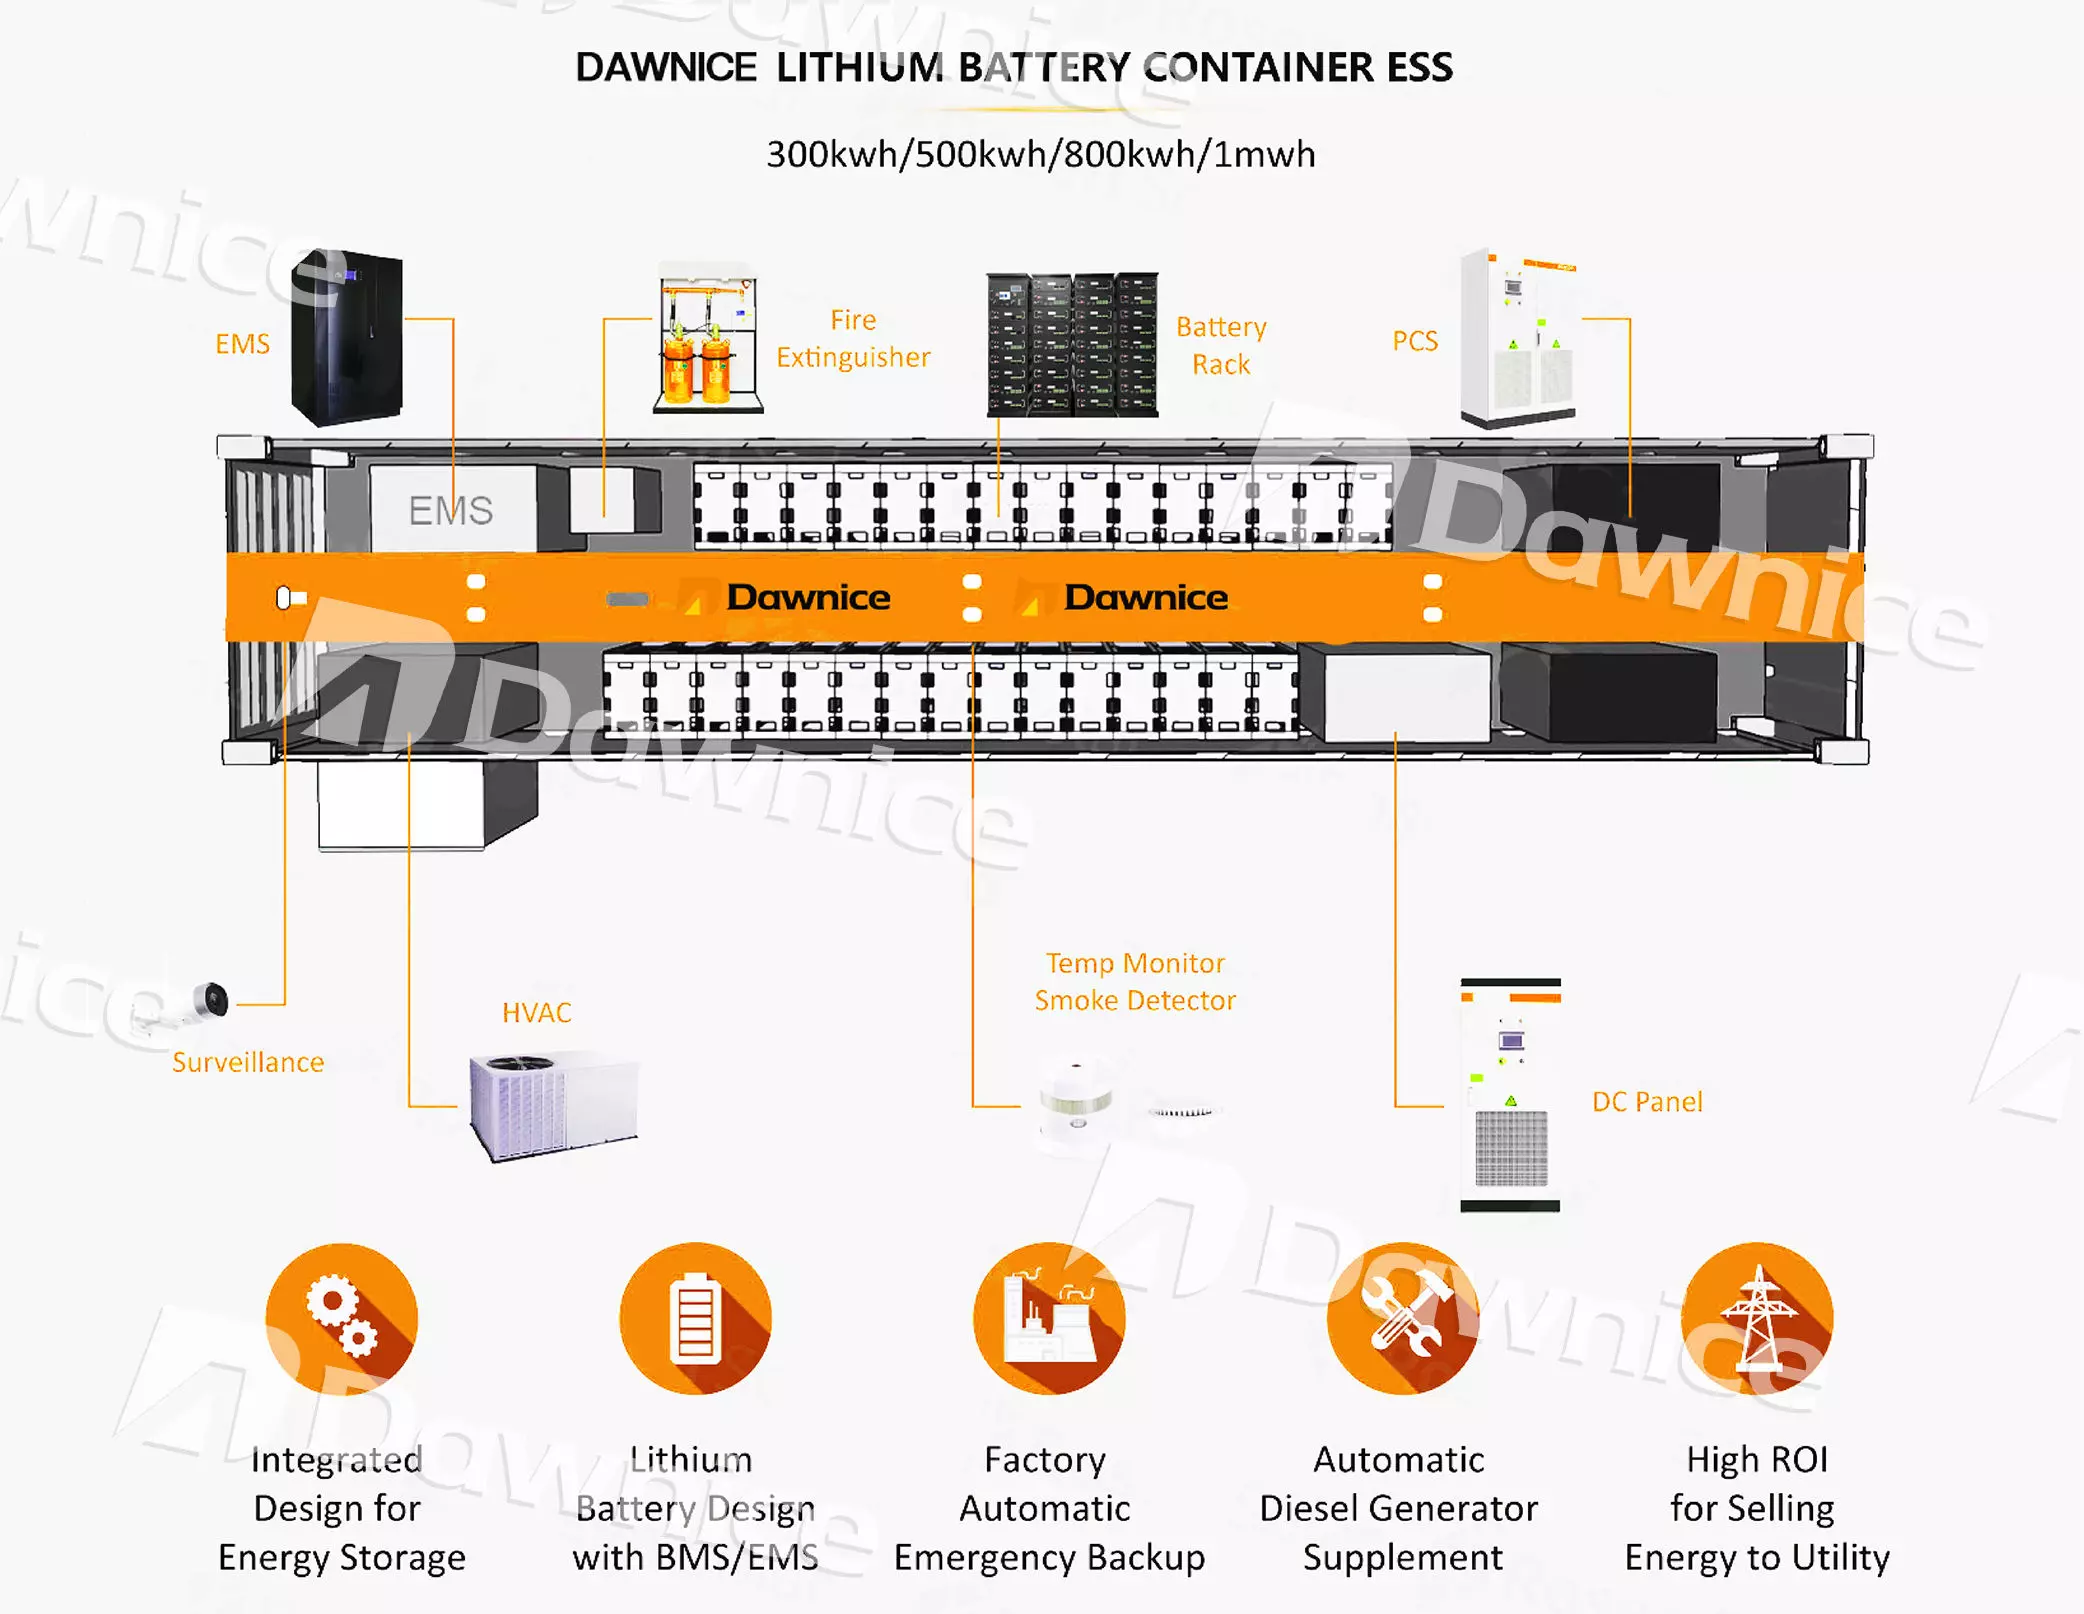 DAWNICE LITHIUM BATTERY CONTAINER ESS